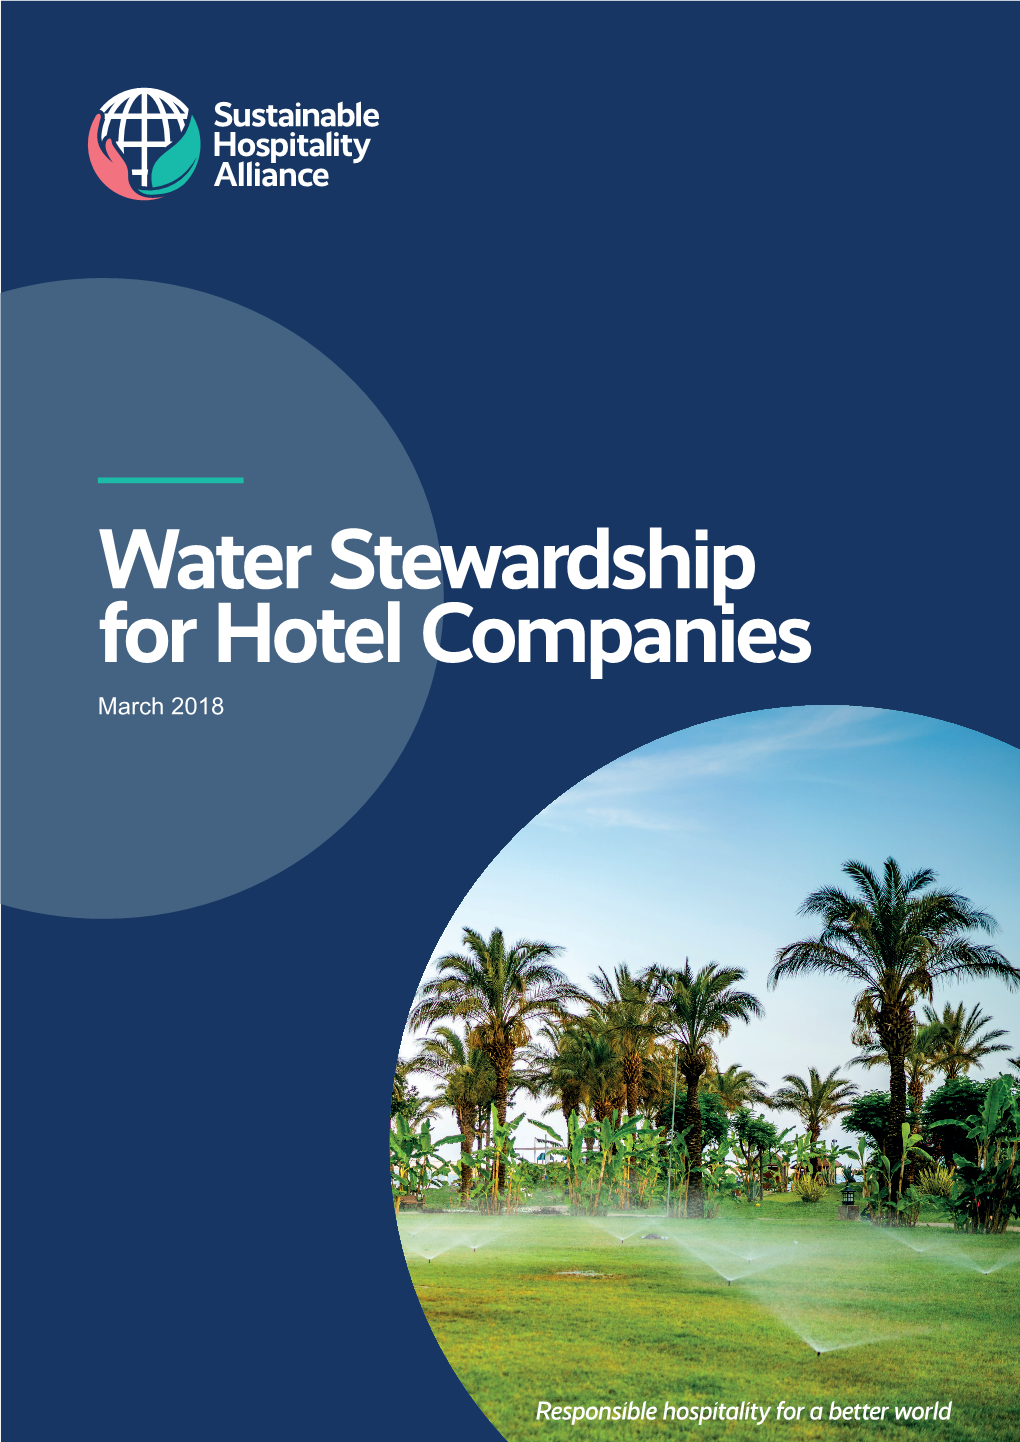 Water Stewardship for Hotel Companies